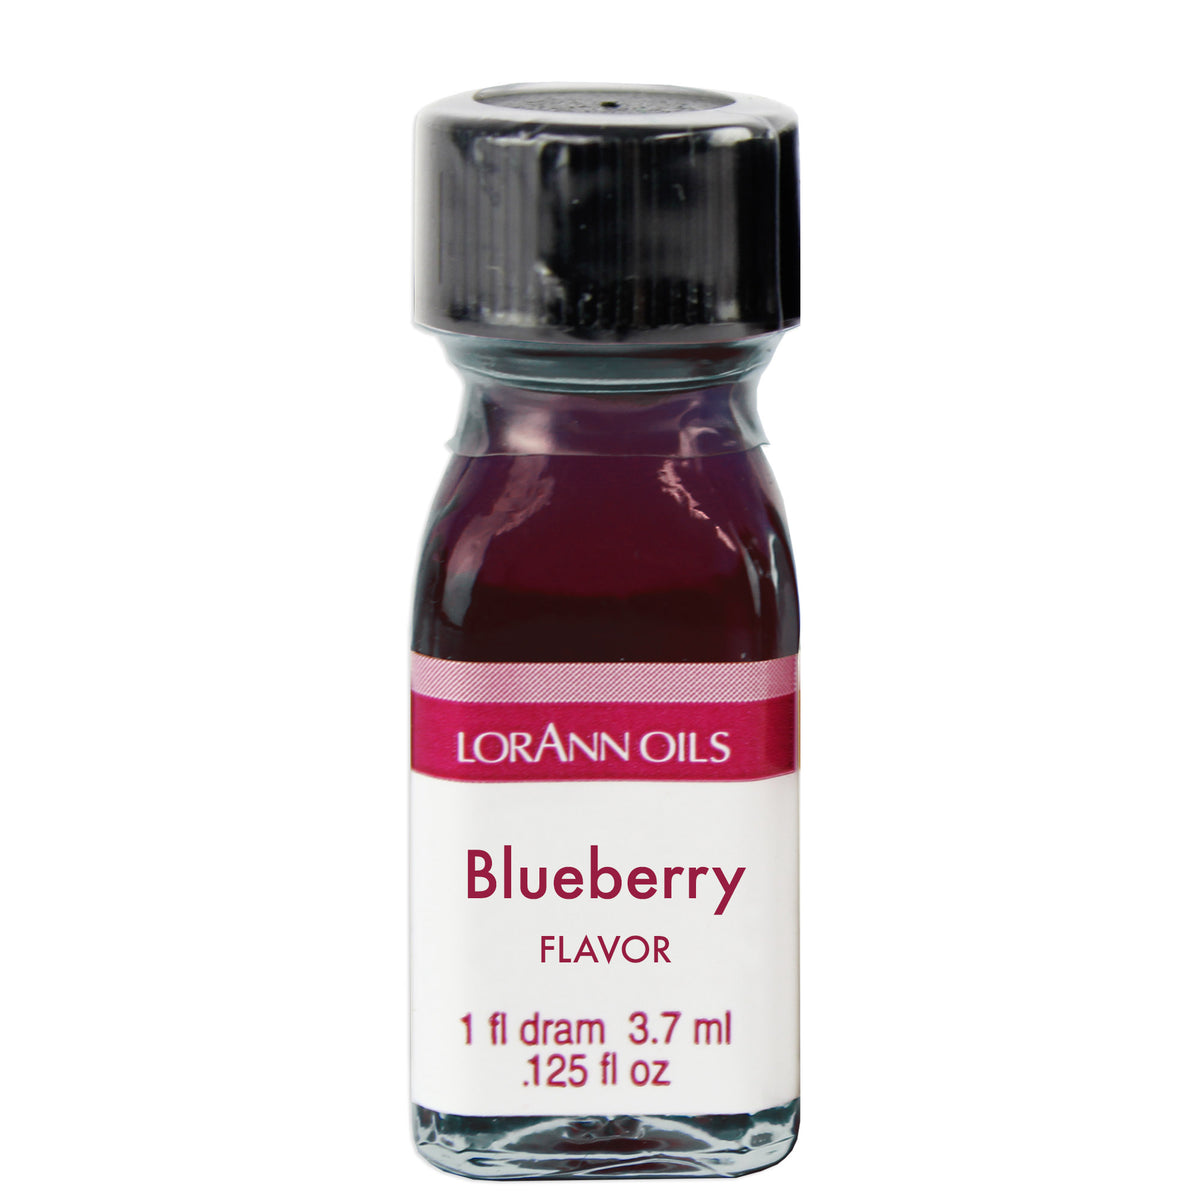 Blueberry Flavoring Oil